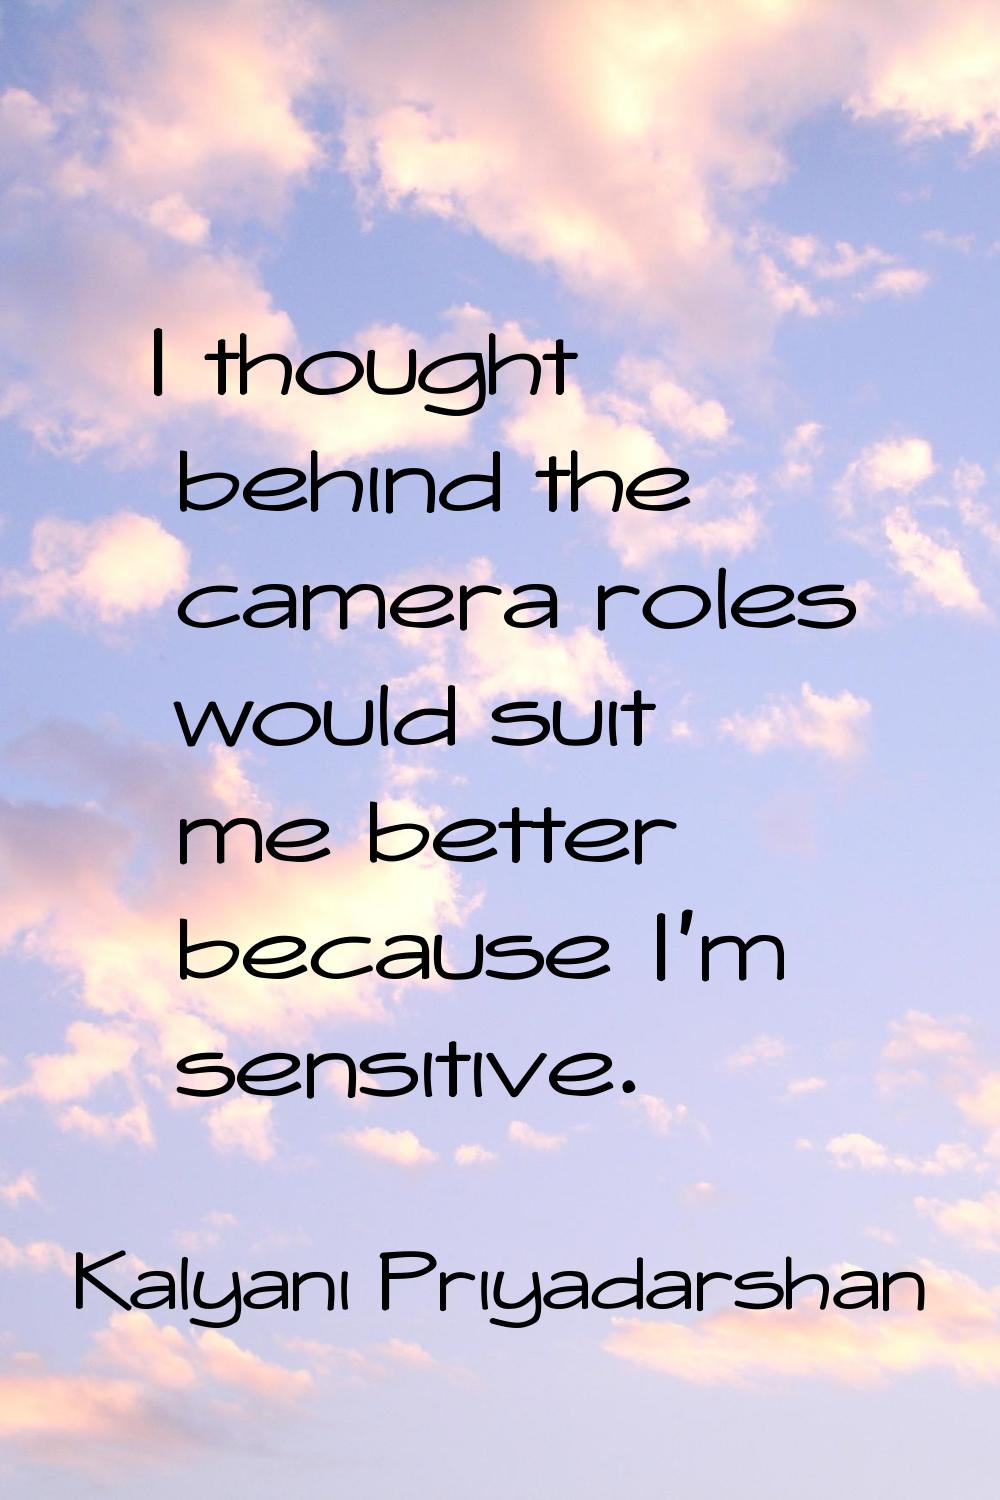 I thought behind the camera roles would suit me better because I'm sensitive.